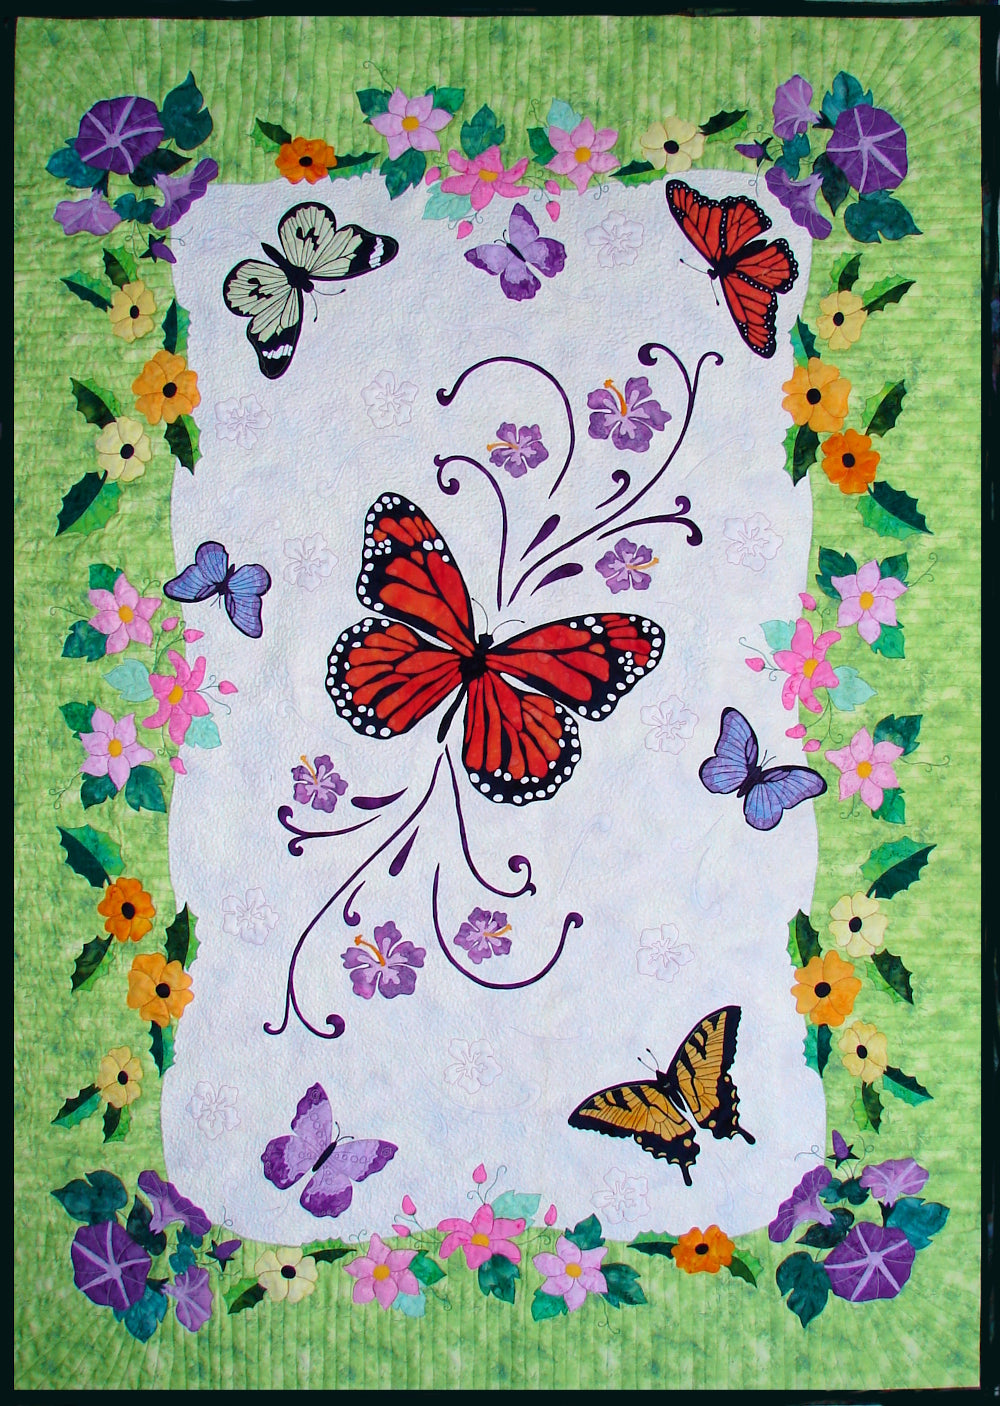 Spring Life quilt pattern with appliqued butterflies and flowers